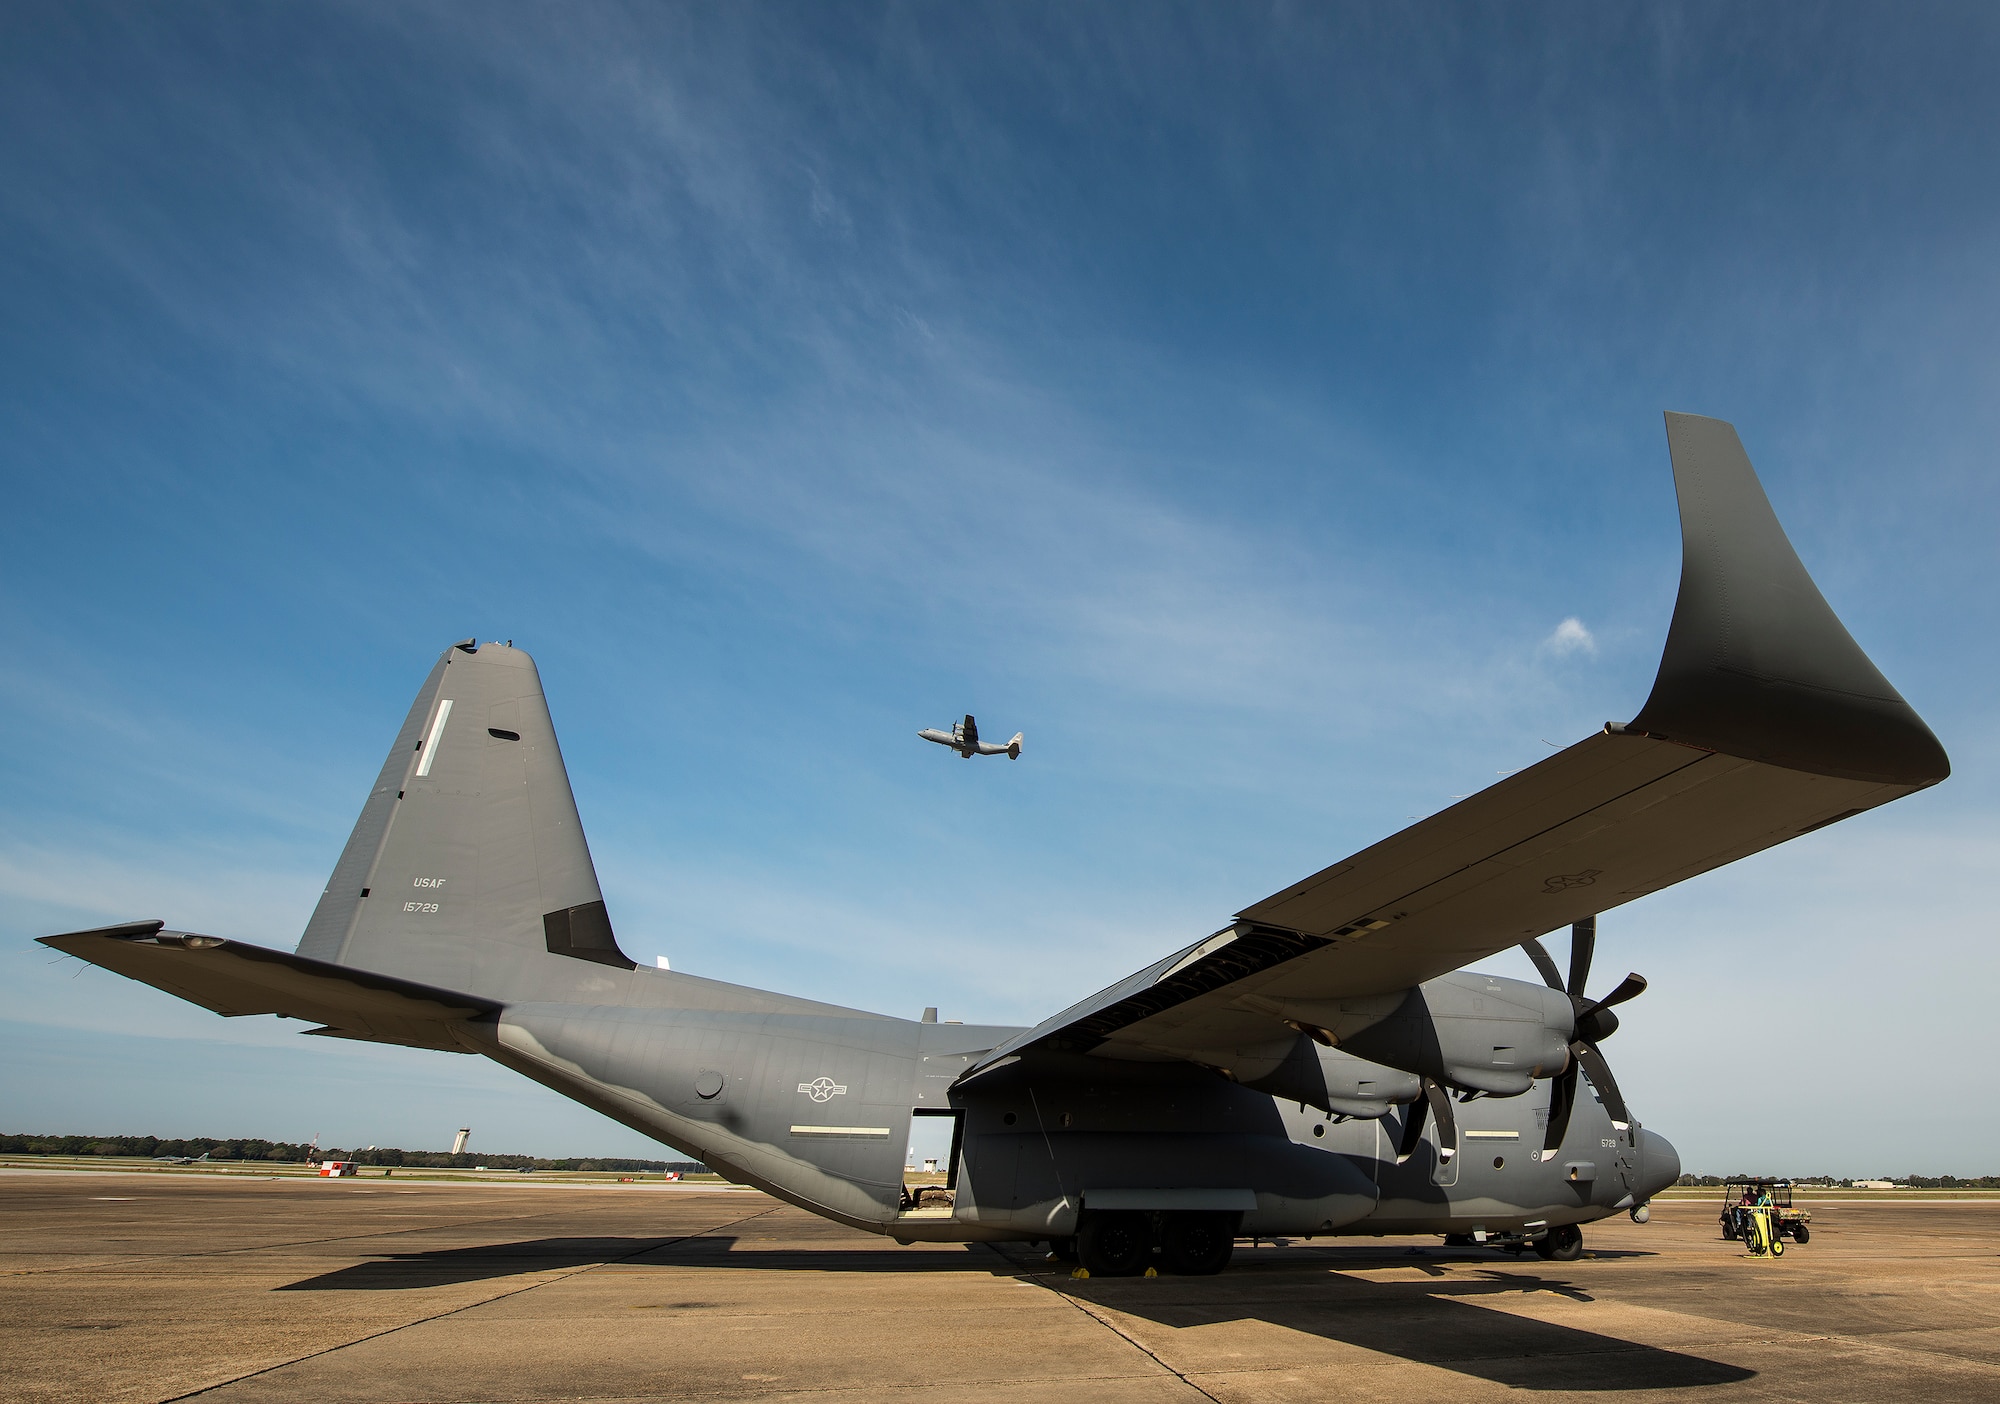 A modified MC-130J waits for its next mission as another C-130 lifts off above it at Eglin Air Force Base, Fla. The test aircraft has been fitted with vertical fins on each wing, called winglets.  The 413th Flight Test Squadron aircrew and engineers tested the modified aircraft over eight flights.  The goal of the tests was to collect data on possible fuel efficiency improvements and performance with the winglets and lift distribution control system installed.  (U.S. Air Force photo/Samuel King Jr.)